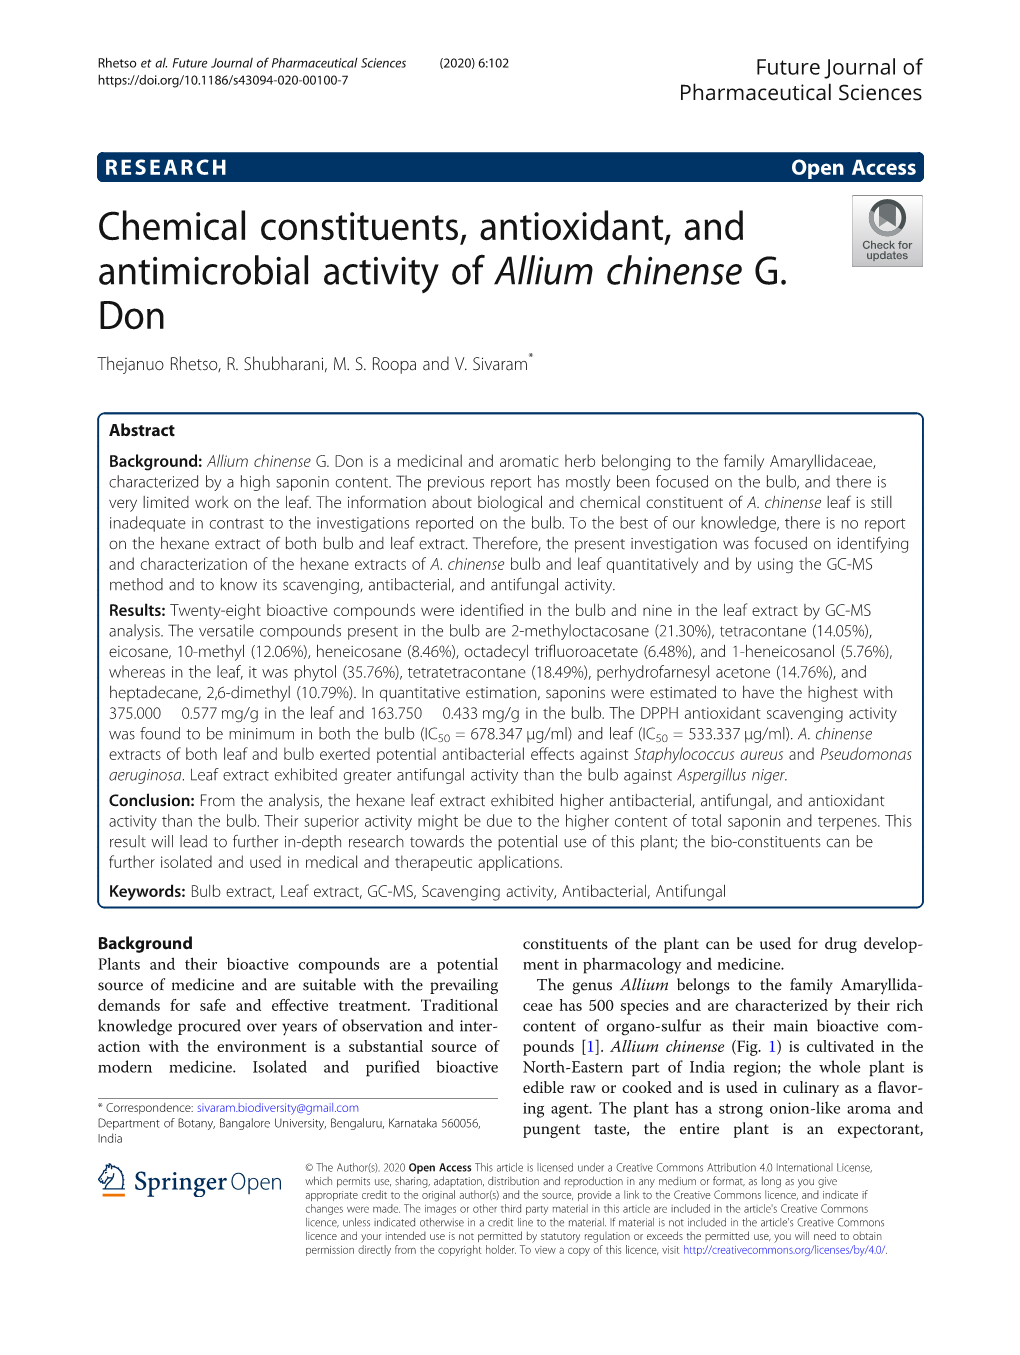 Chemical Constituents, Antioxidant, and Antimicrobial Activity of Allium Chinense G